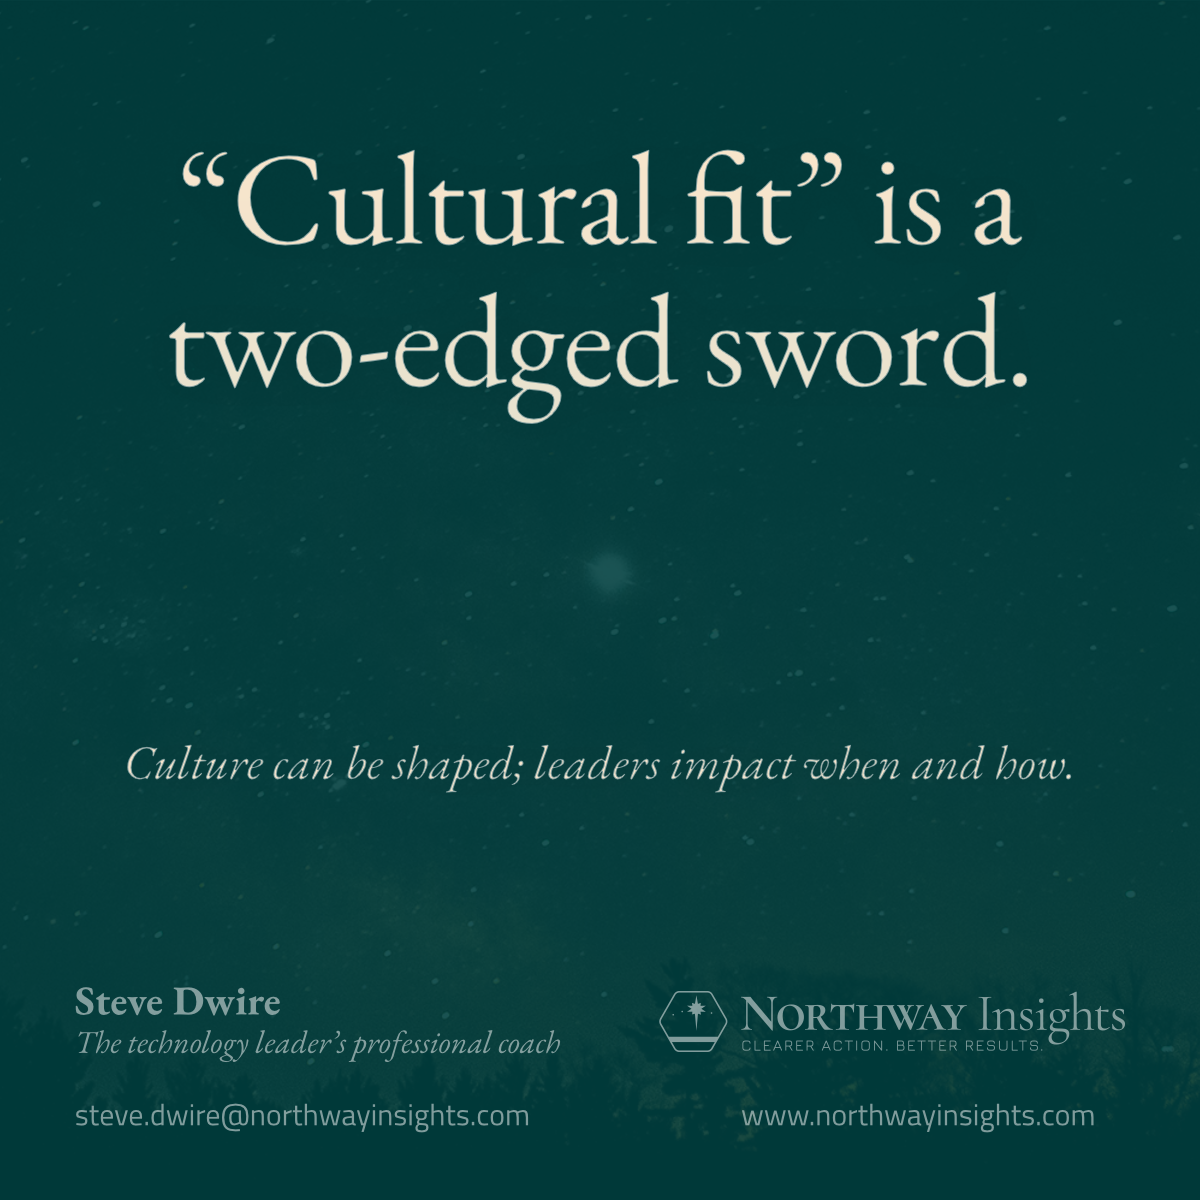 “Cultural fit” is a two-edged sword